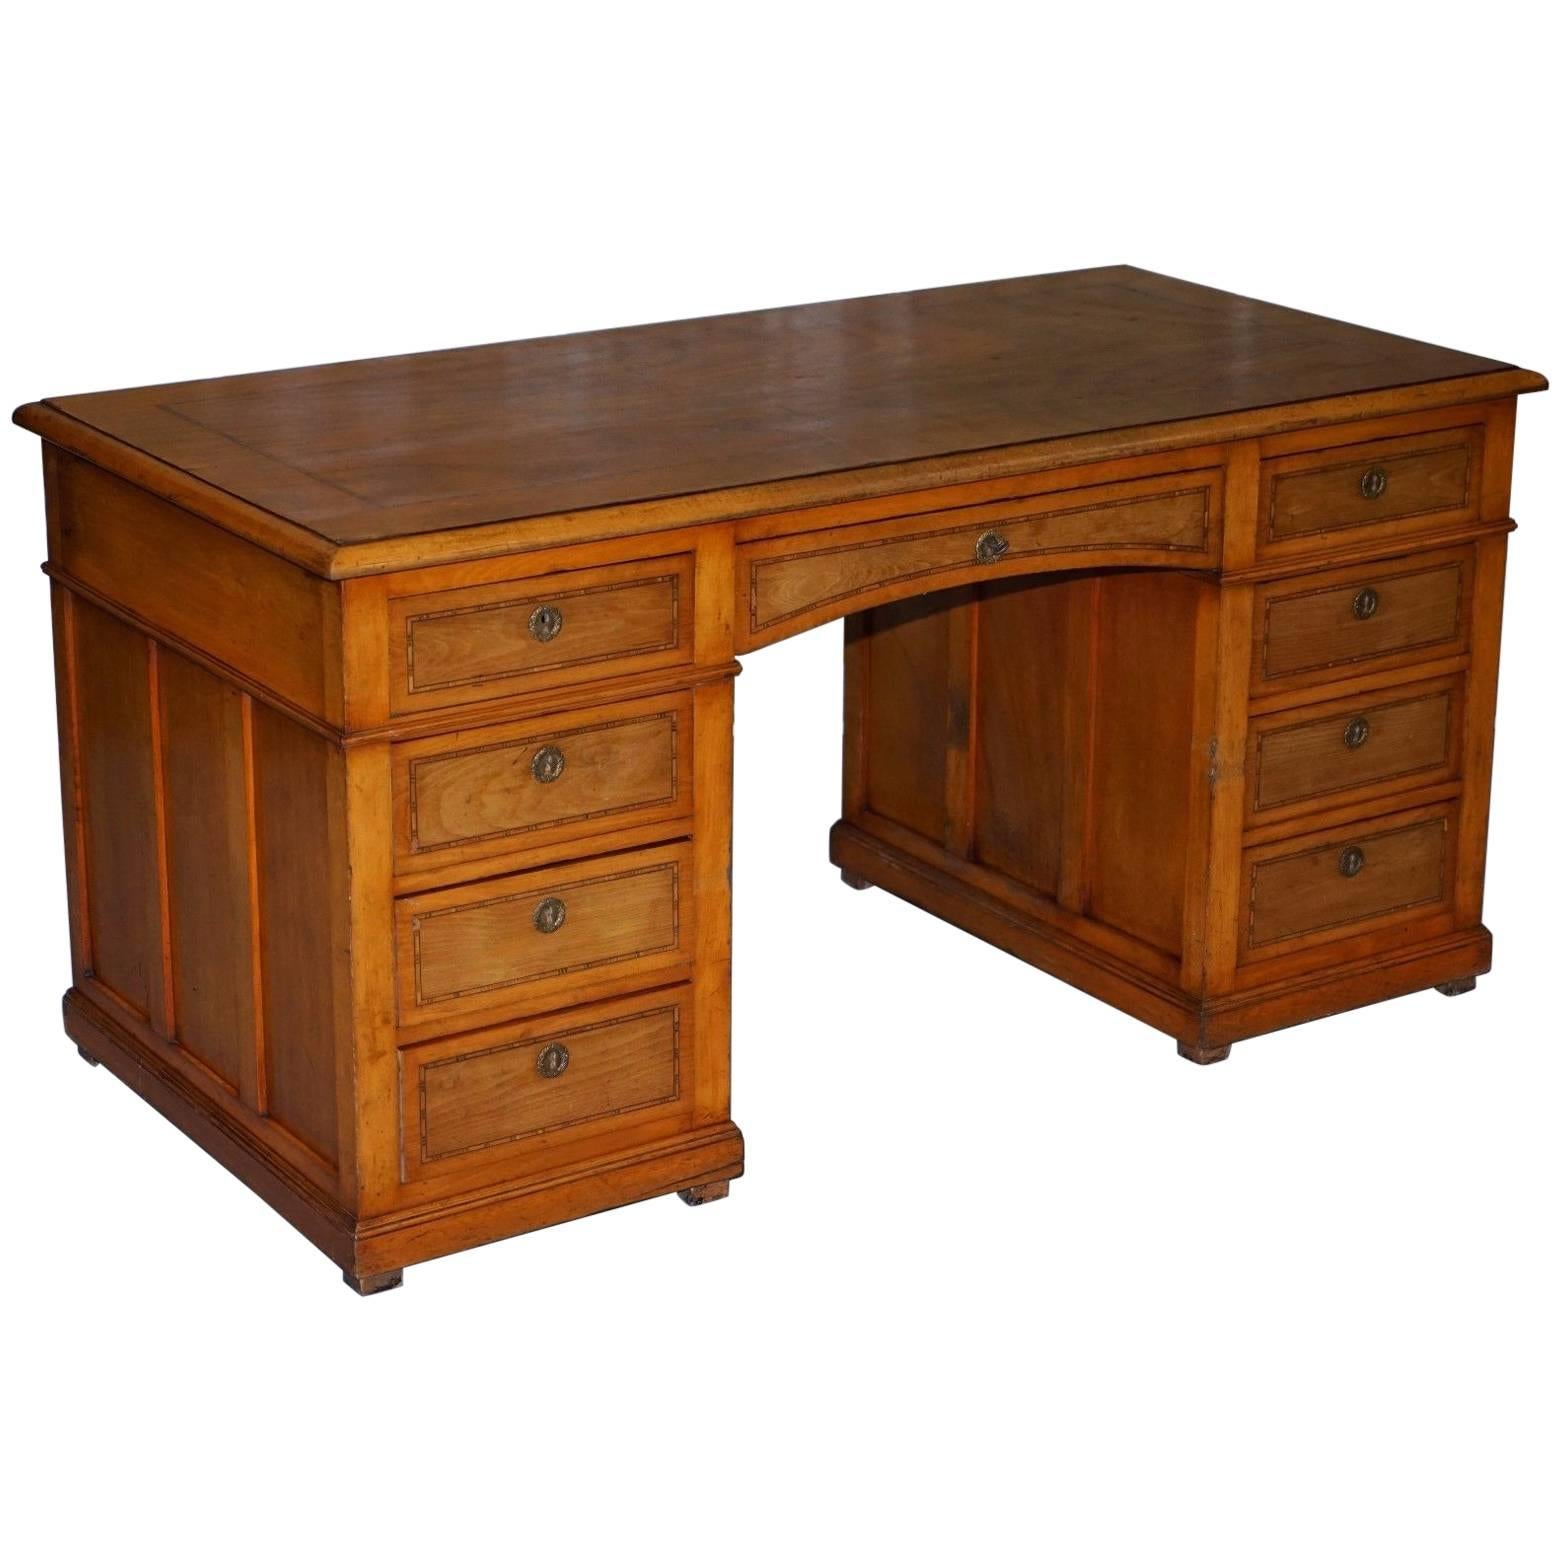 Victorian Satinwood and Boxwood Inlay Twin Pedestal Partner Desk Gillows